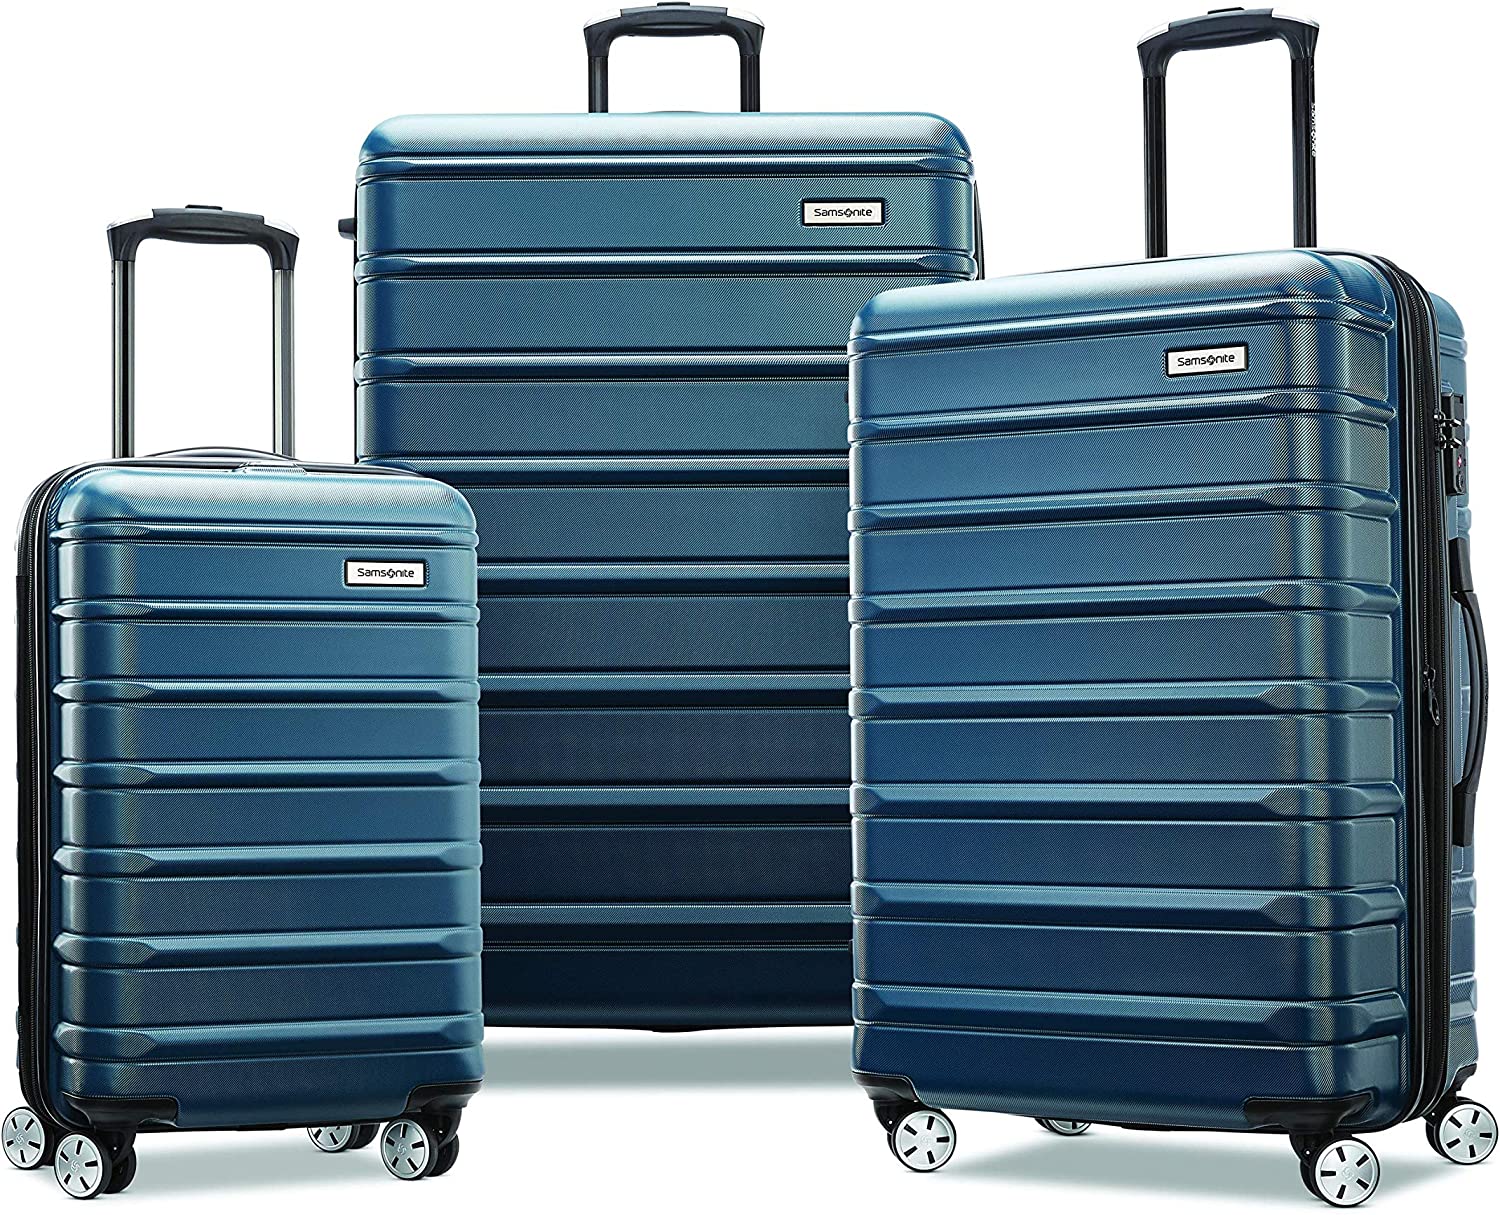 Top Travel Luggage and Accessories: Your Ultimate Amazon Shopping Guide!